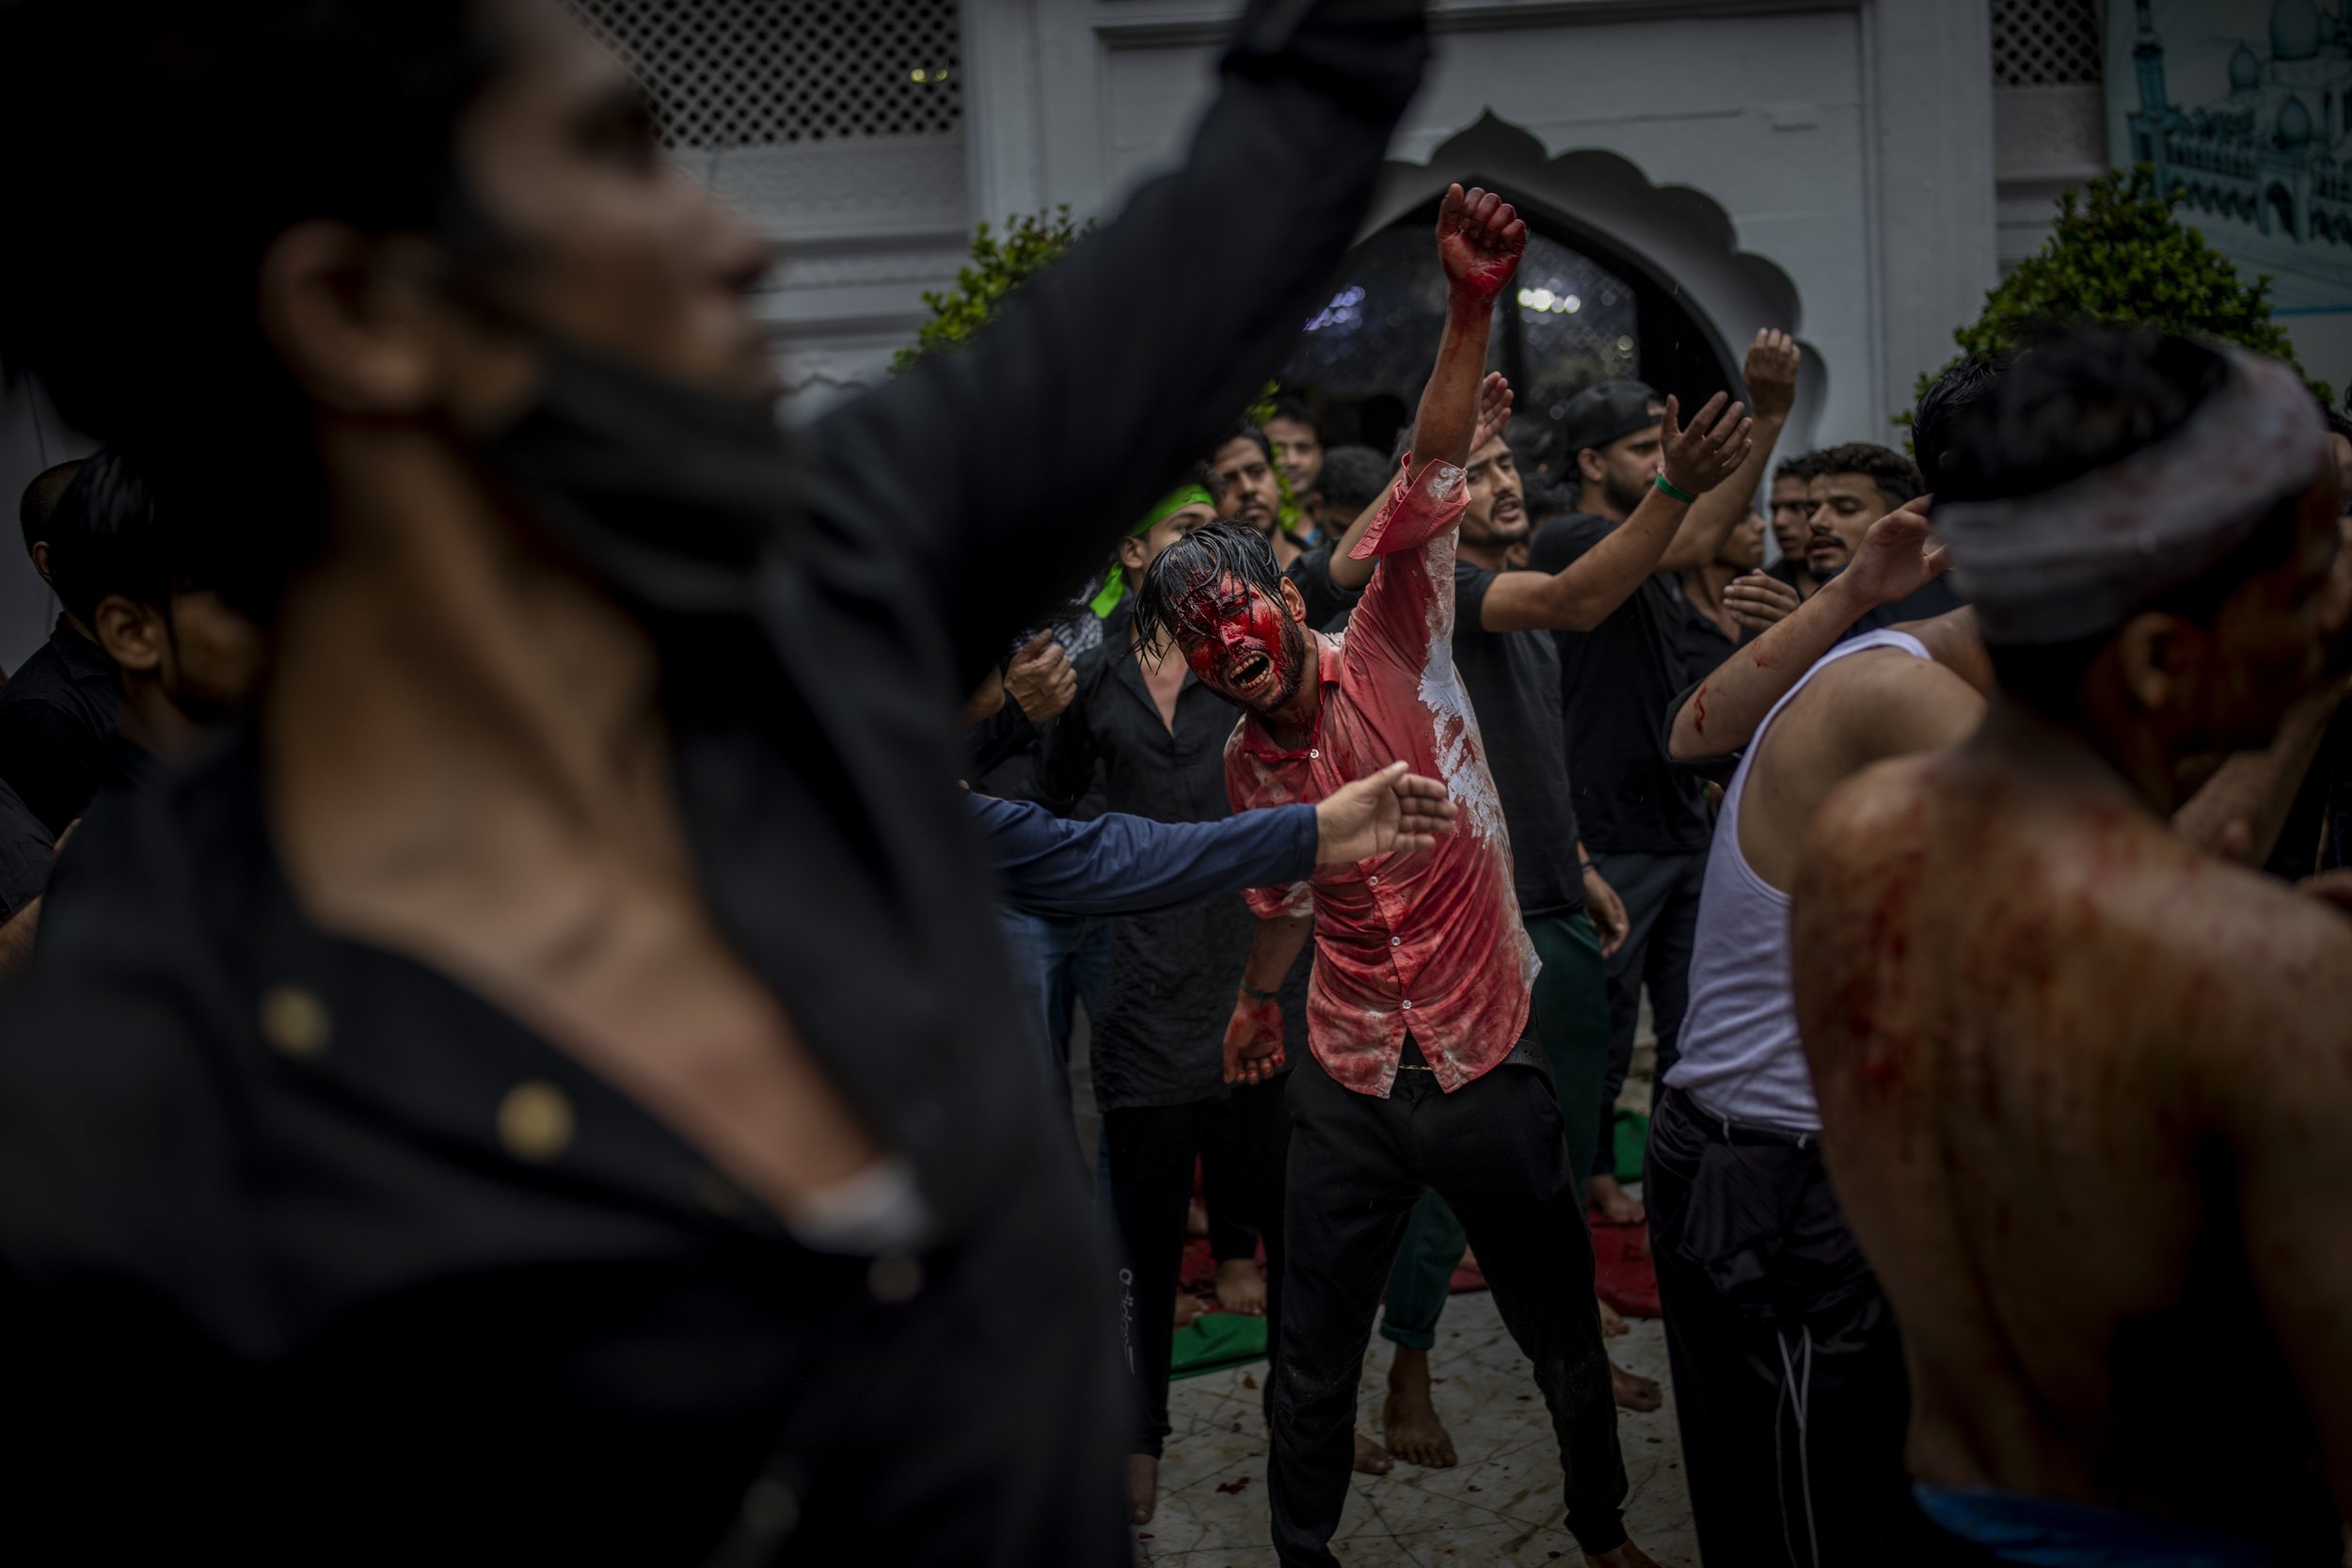  Shiite Muslims flagellate themselves during a procession to mark Ashoura in New Delhi, India, on Aug. 20, 2021. (AP Photo/Altaf Qadri) 